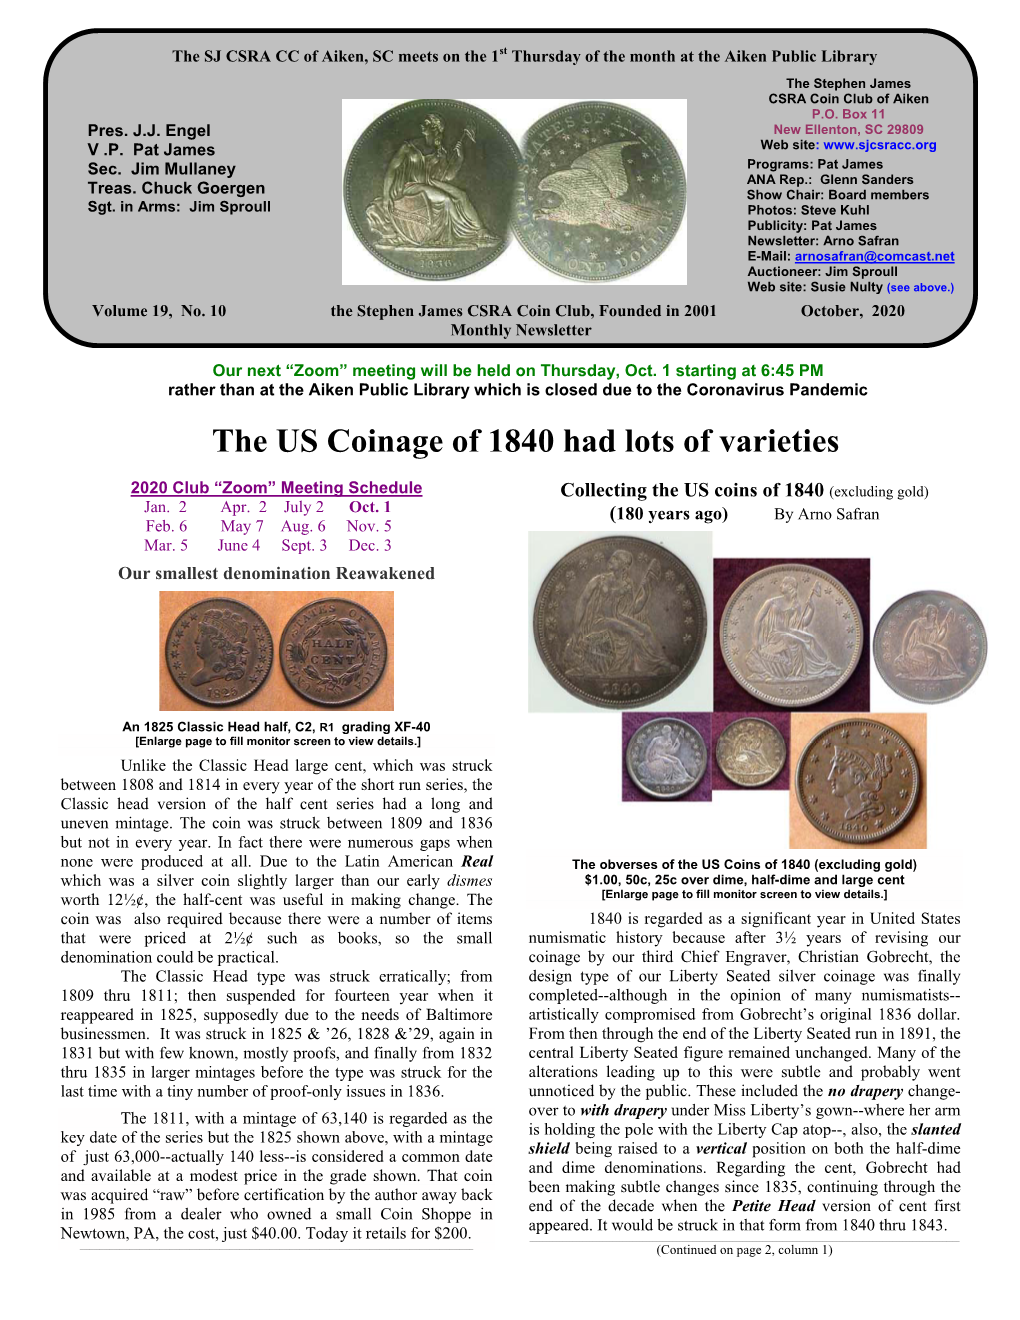 The US Coinage of 1840 Had Lots of Varieties